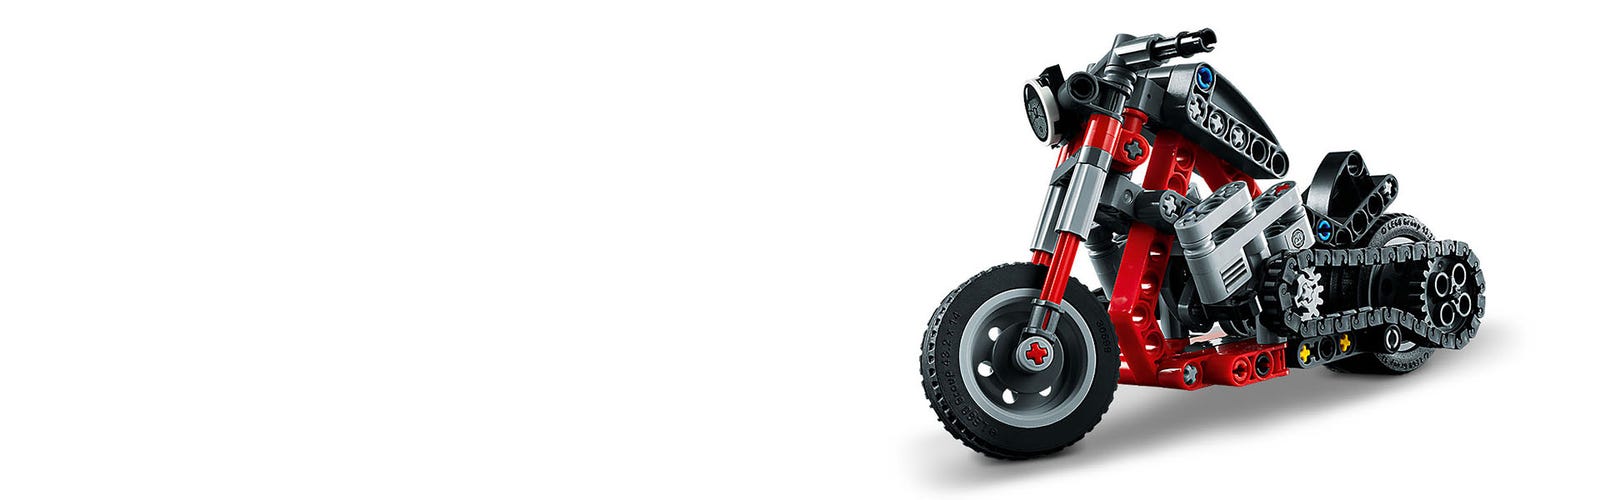 Motorcycle 42132 | Technic | Buy online at the Official LEGO® Shop ES